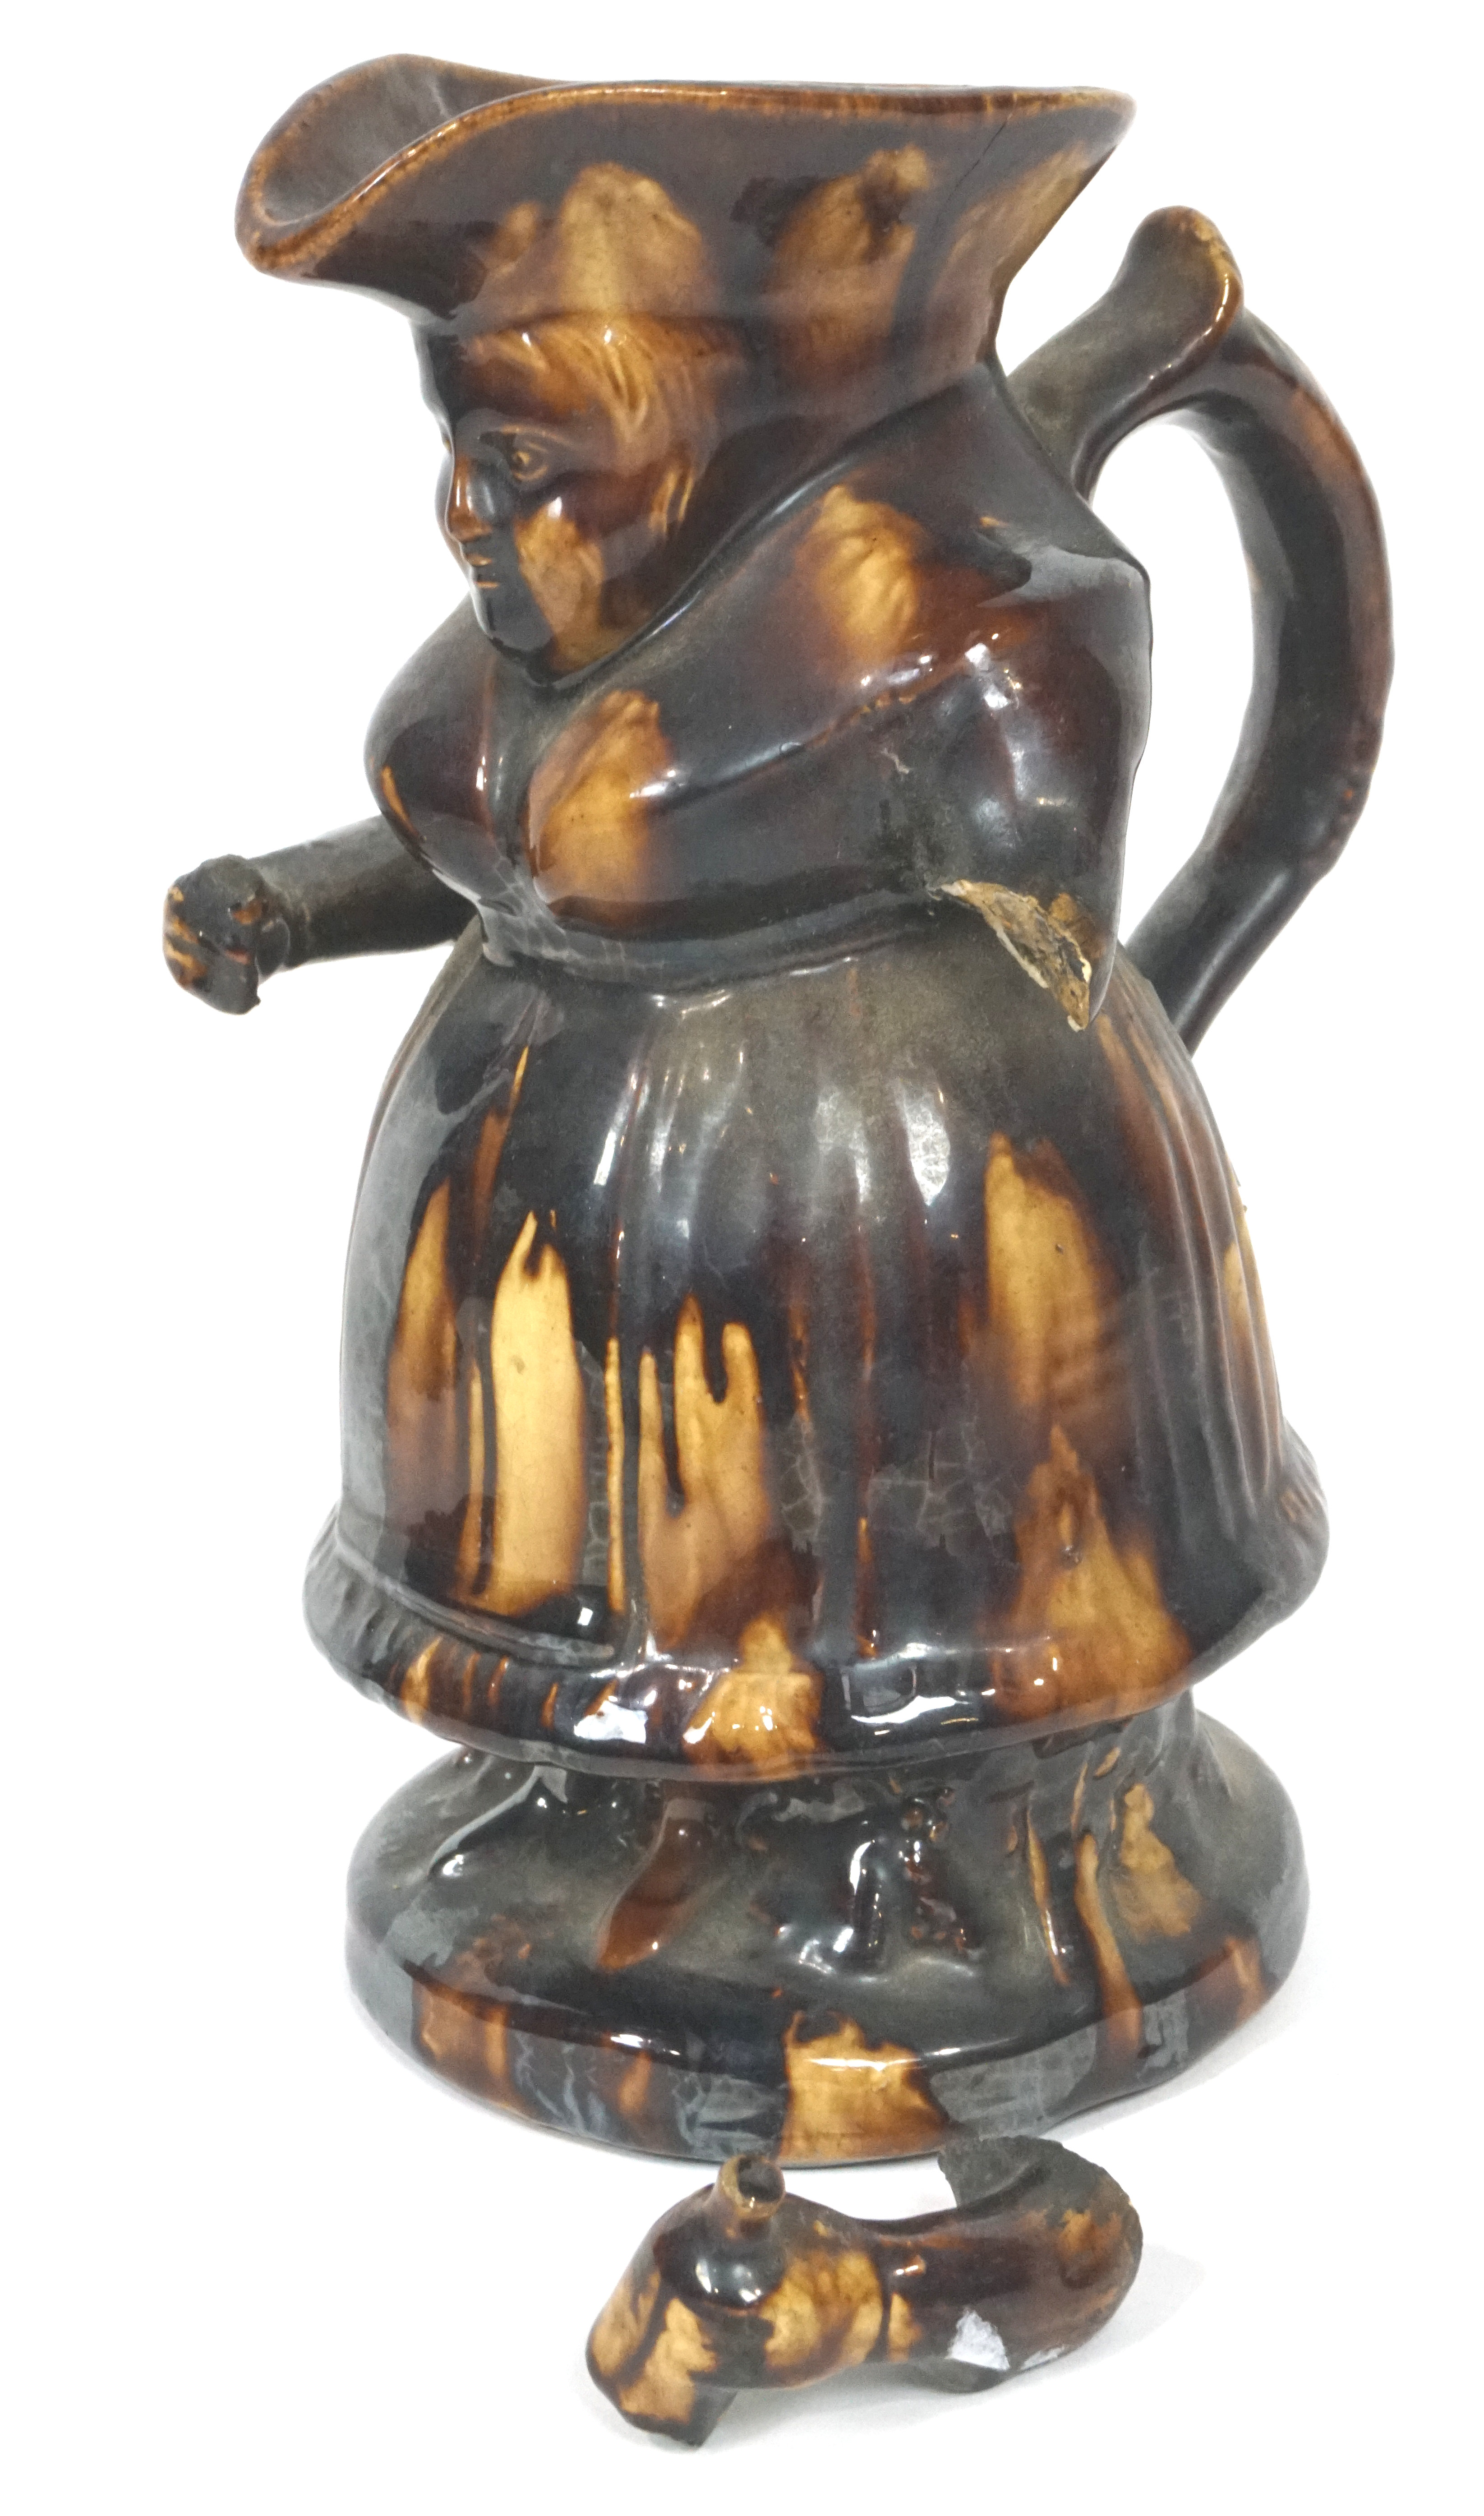 Two Staffordshire pottery treacle glazed Toby jugs and a teapot and cover, 19th century, - Image 3 of 4